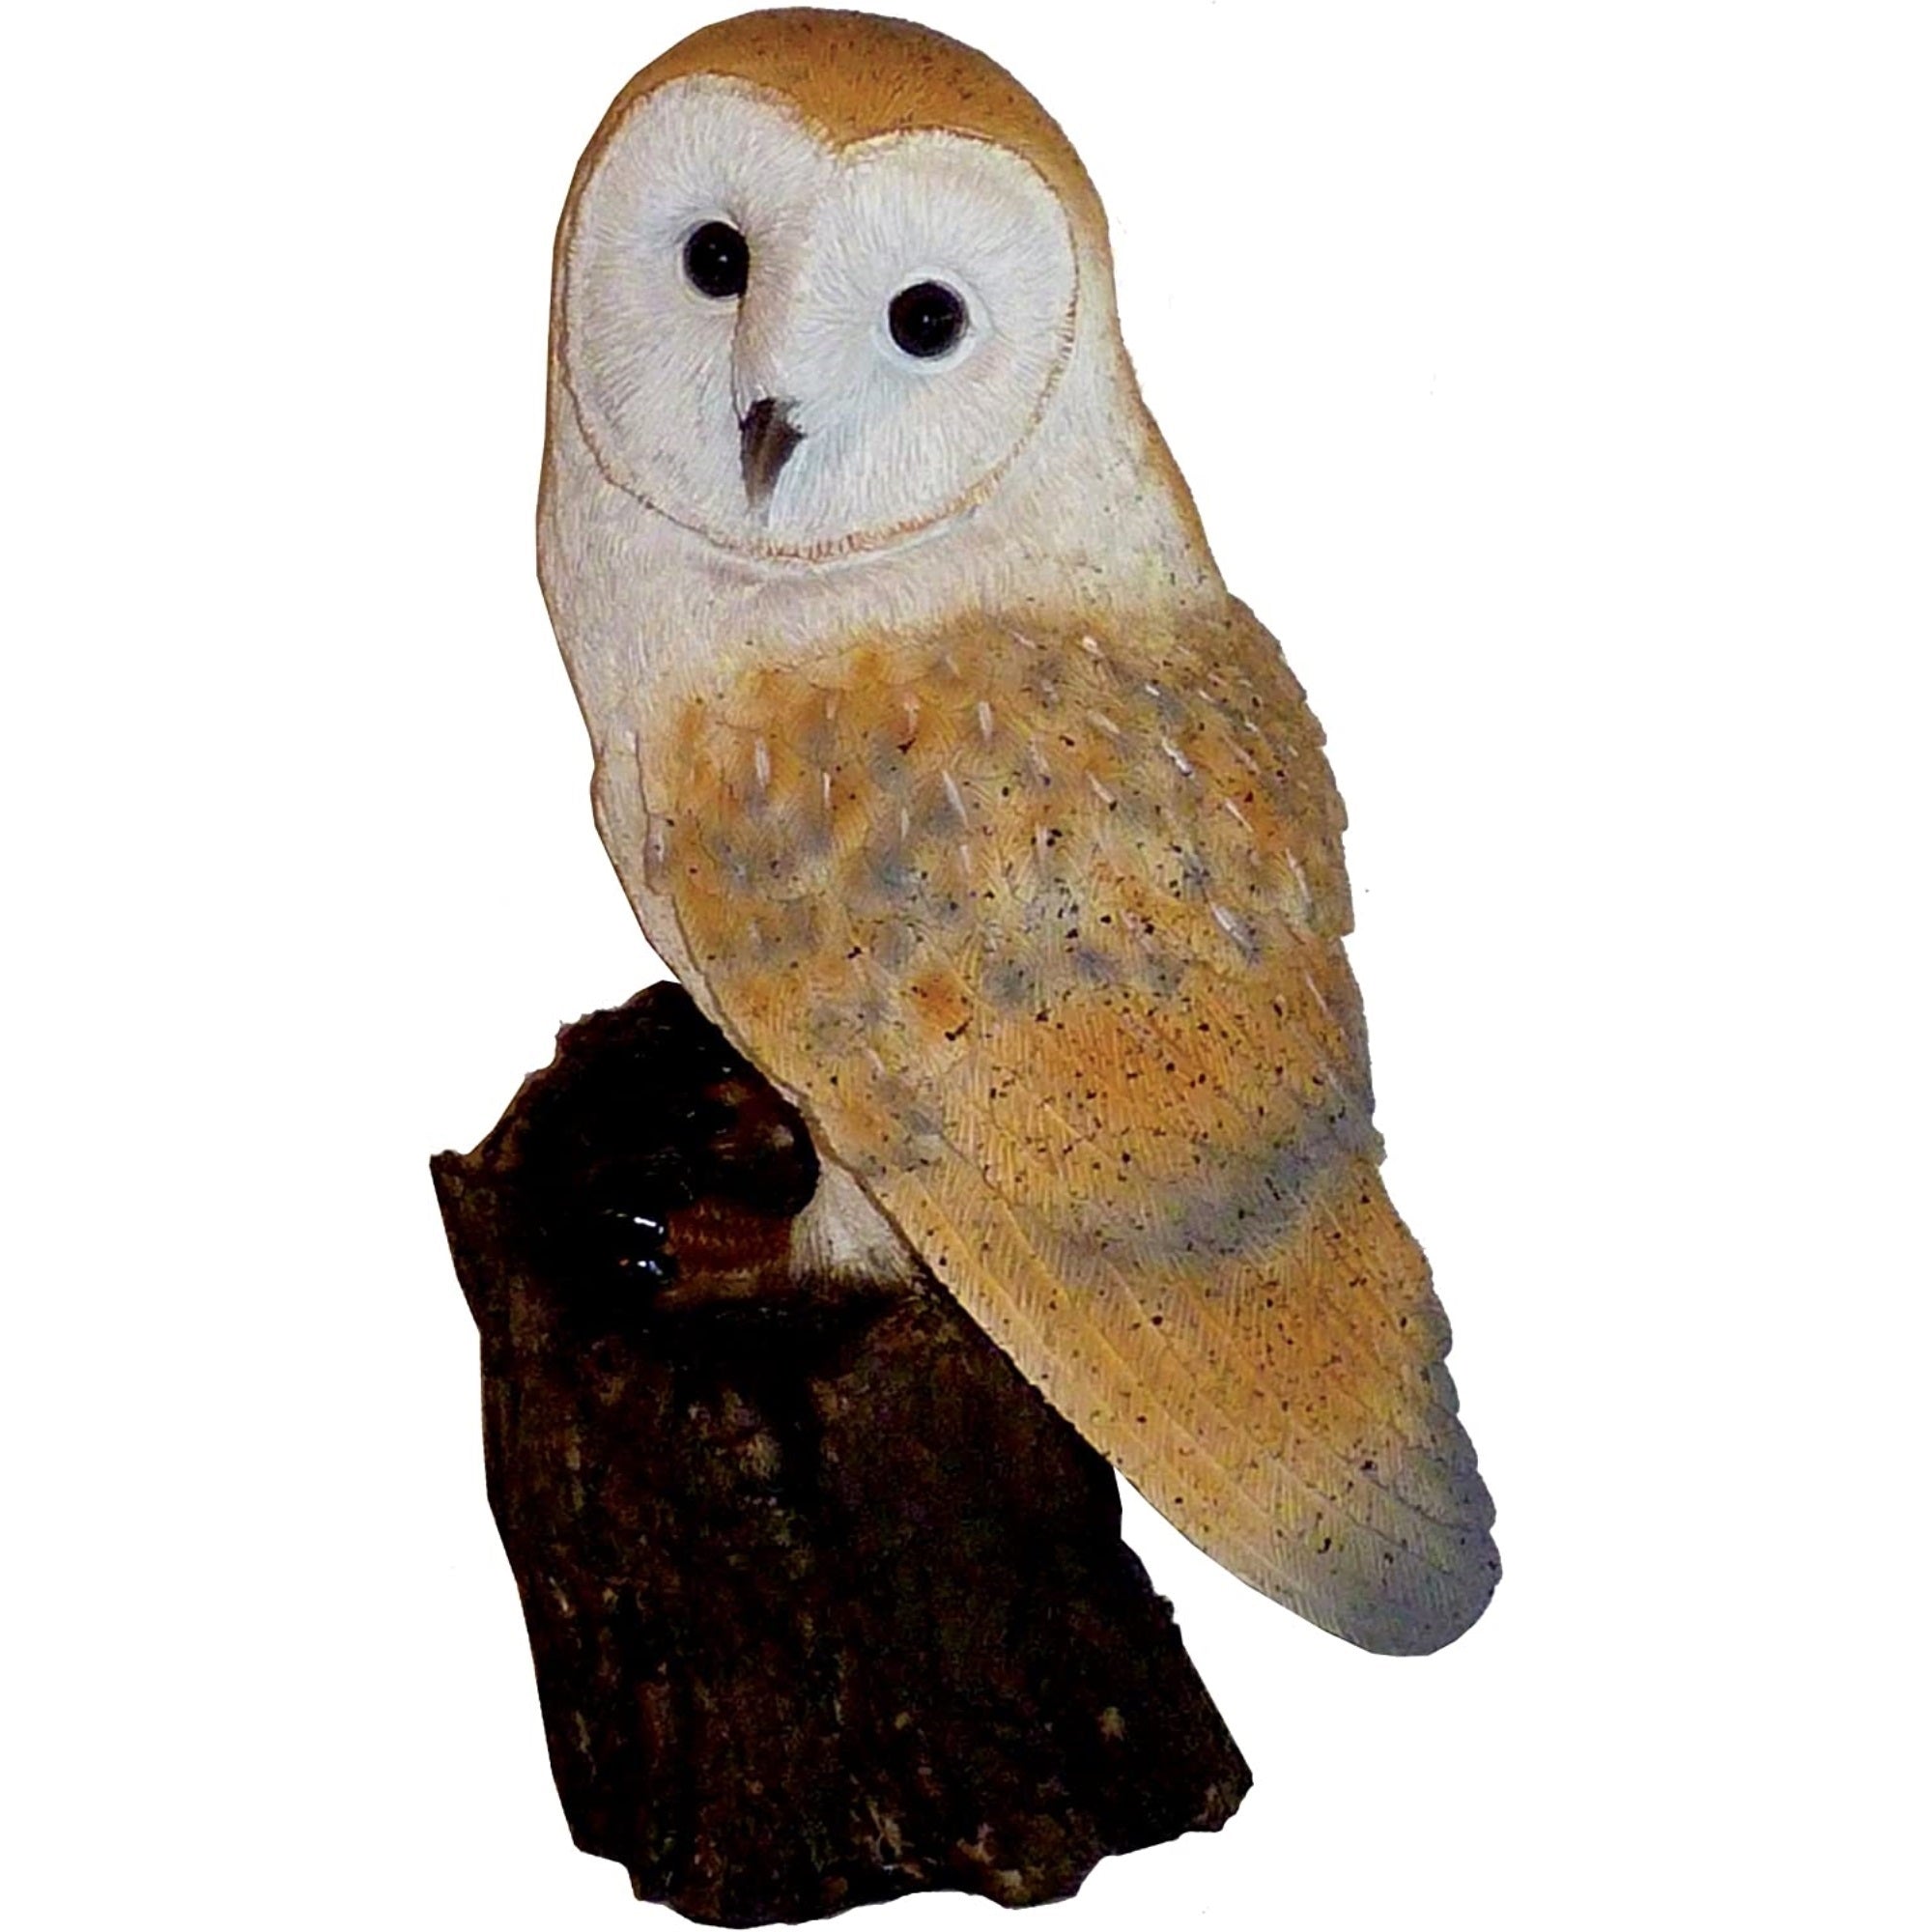 Michael Carr Designs Figurine for Garden and Lawns, Barn Owl On A Stump, 10.25"